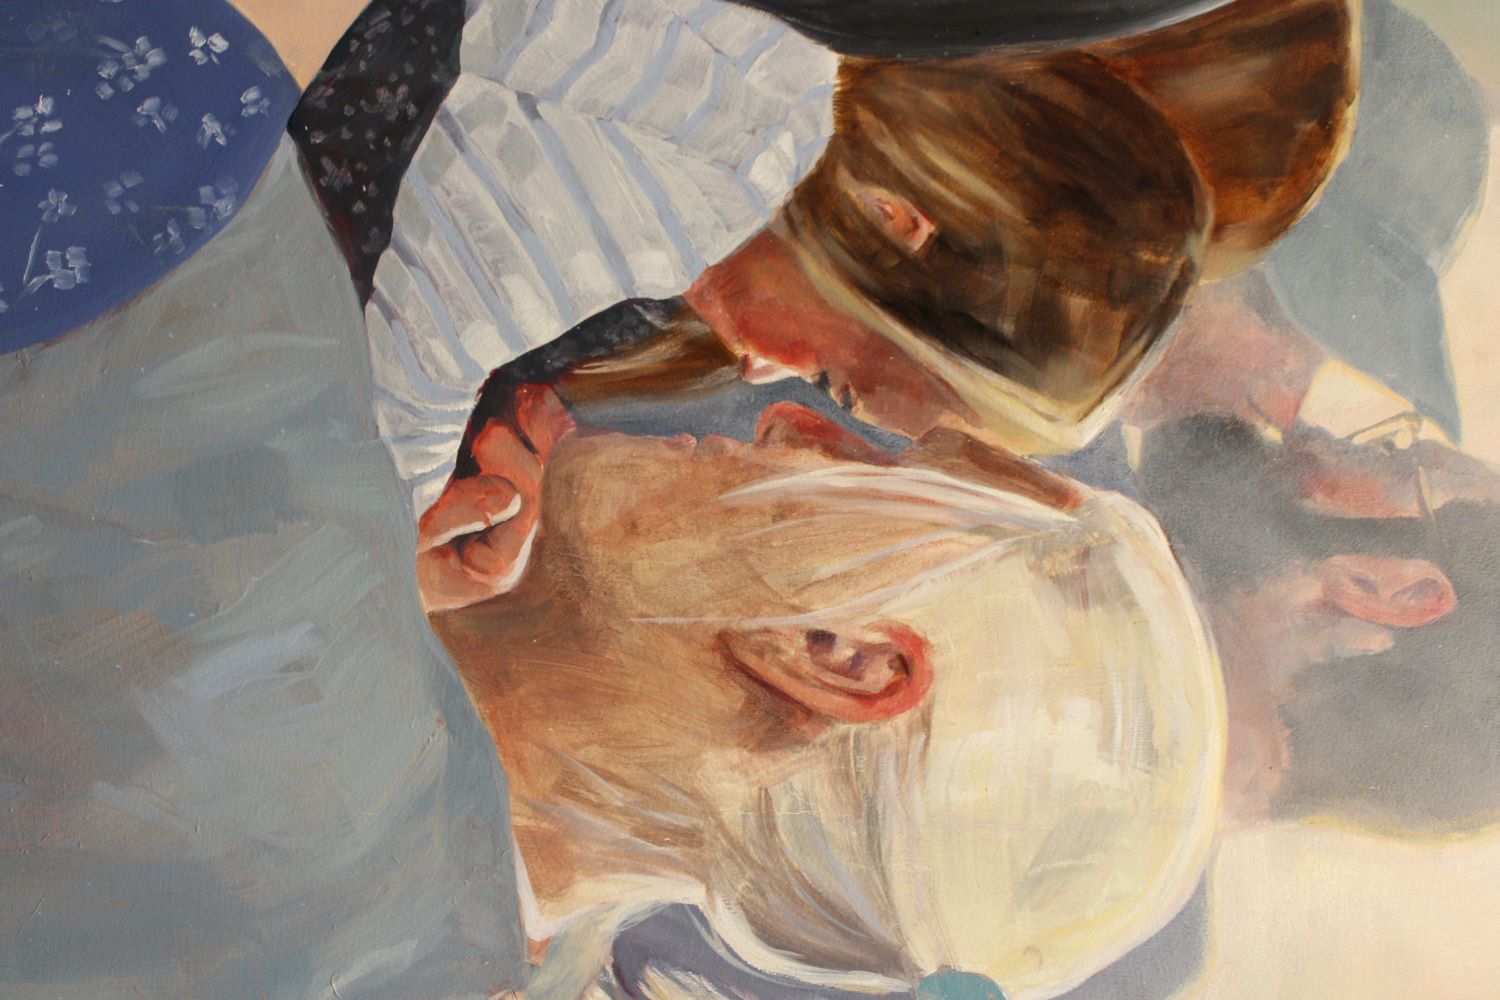 Detail image of a painting that shows an older woman and child in the foreground and in the background, a male and female embrace.